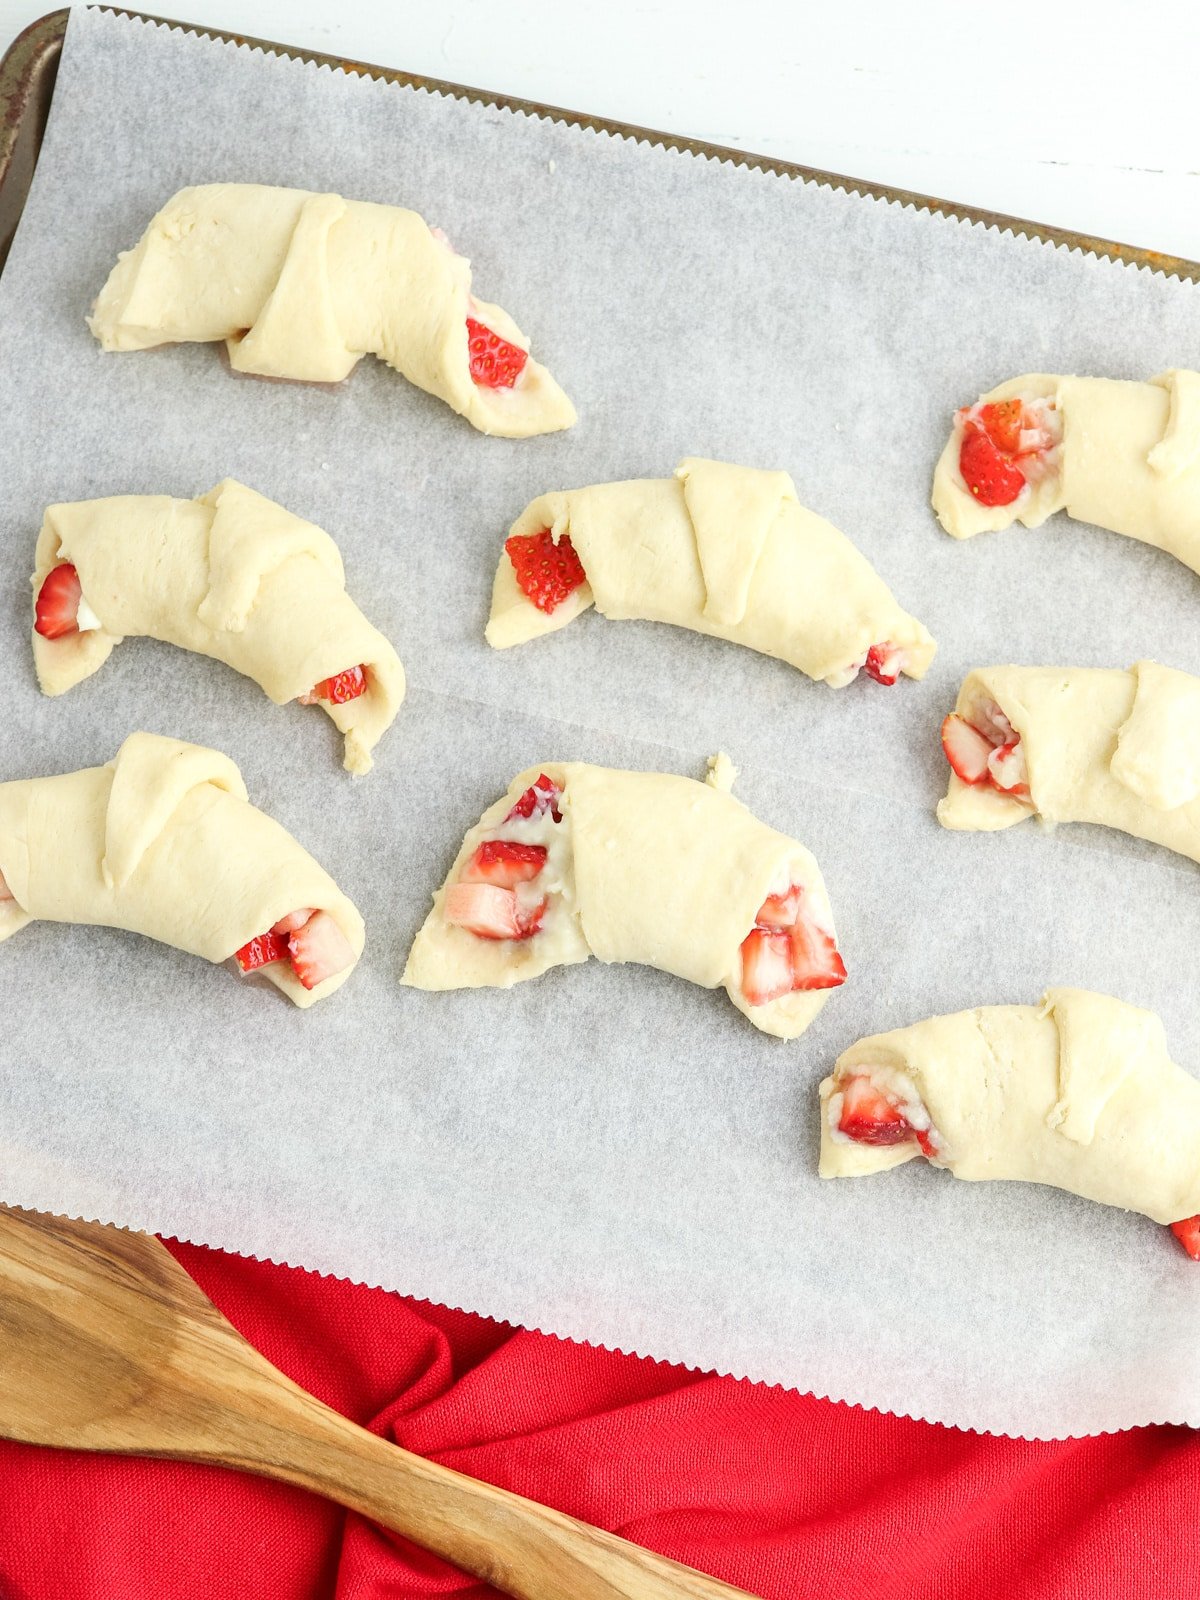 roll crescents and place on parchment paper lined cookie sheet